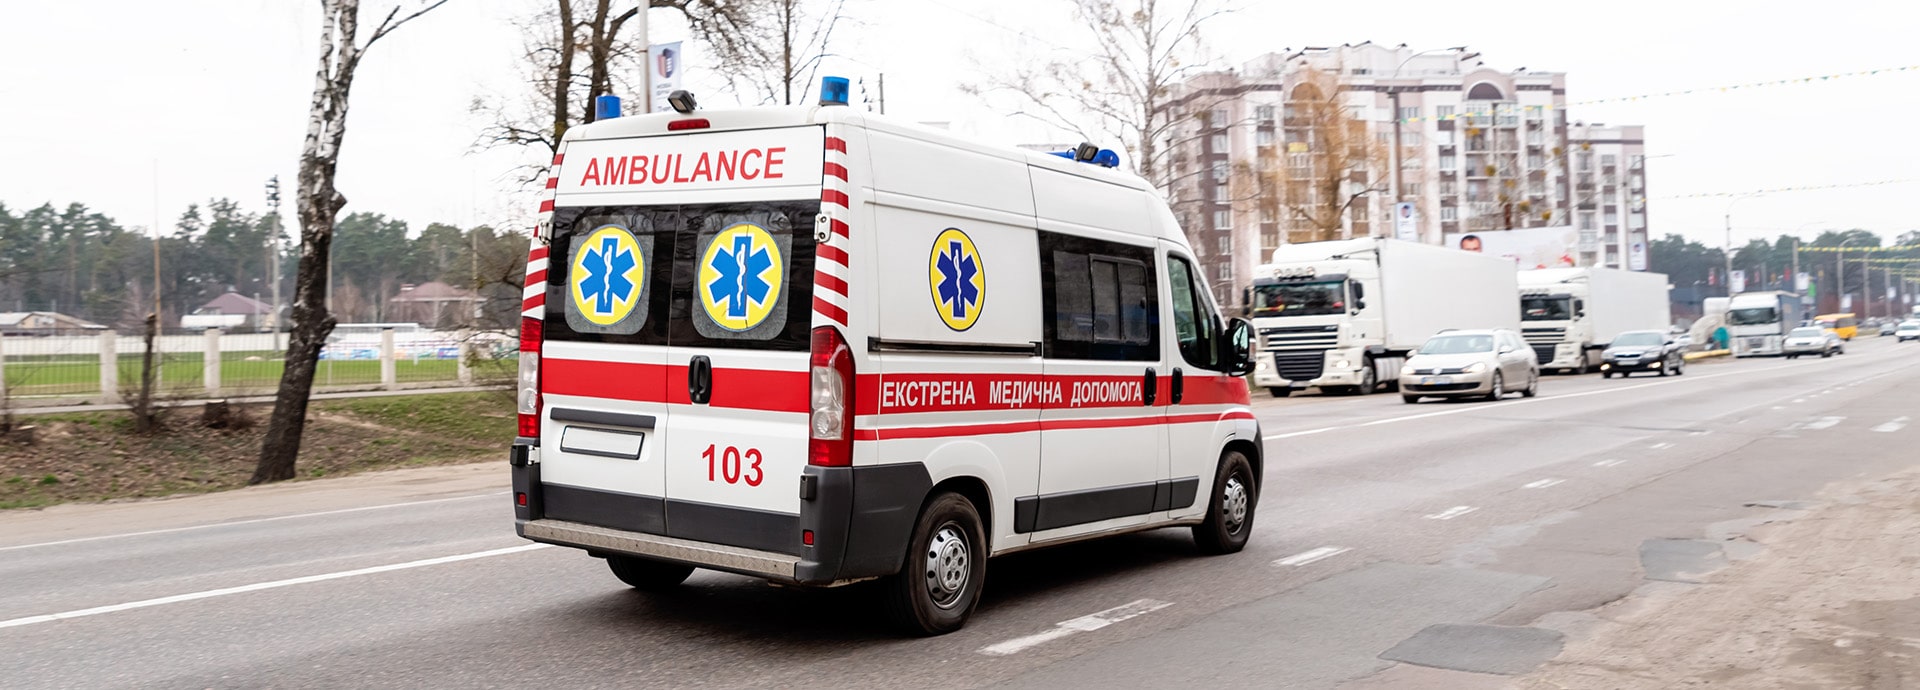 Let’s help repair ambulances for the front!